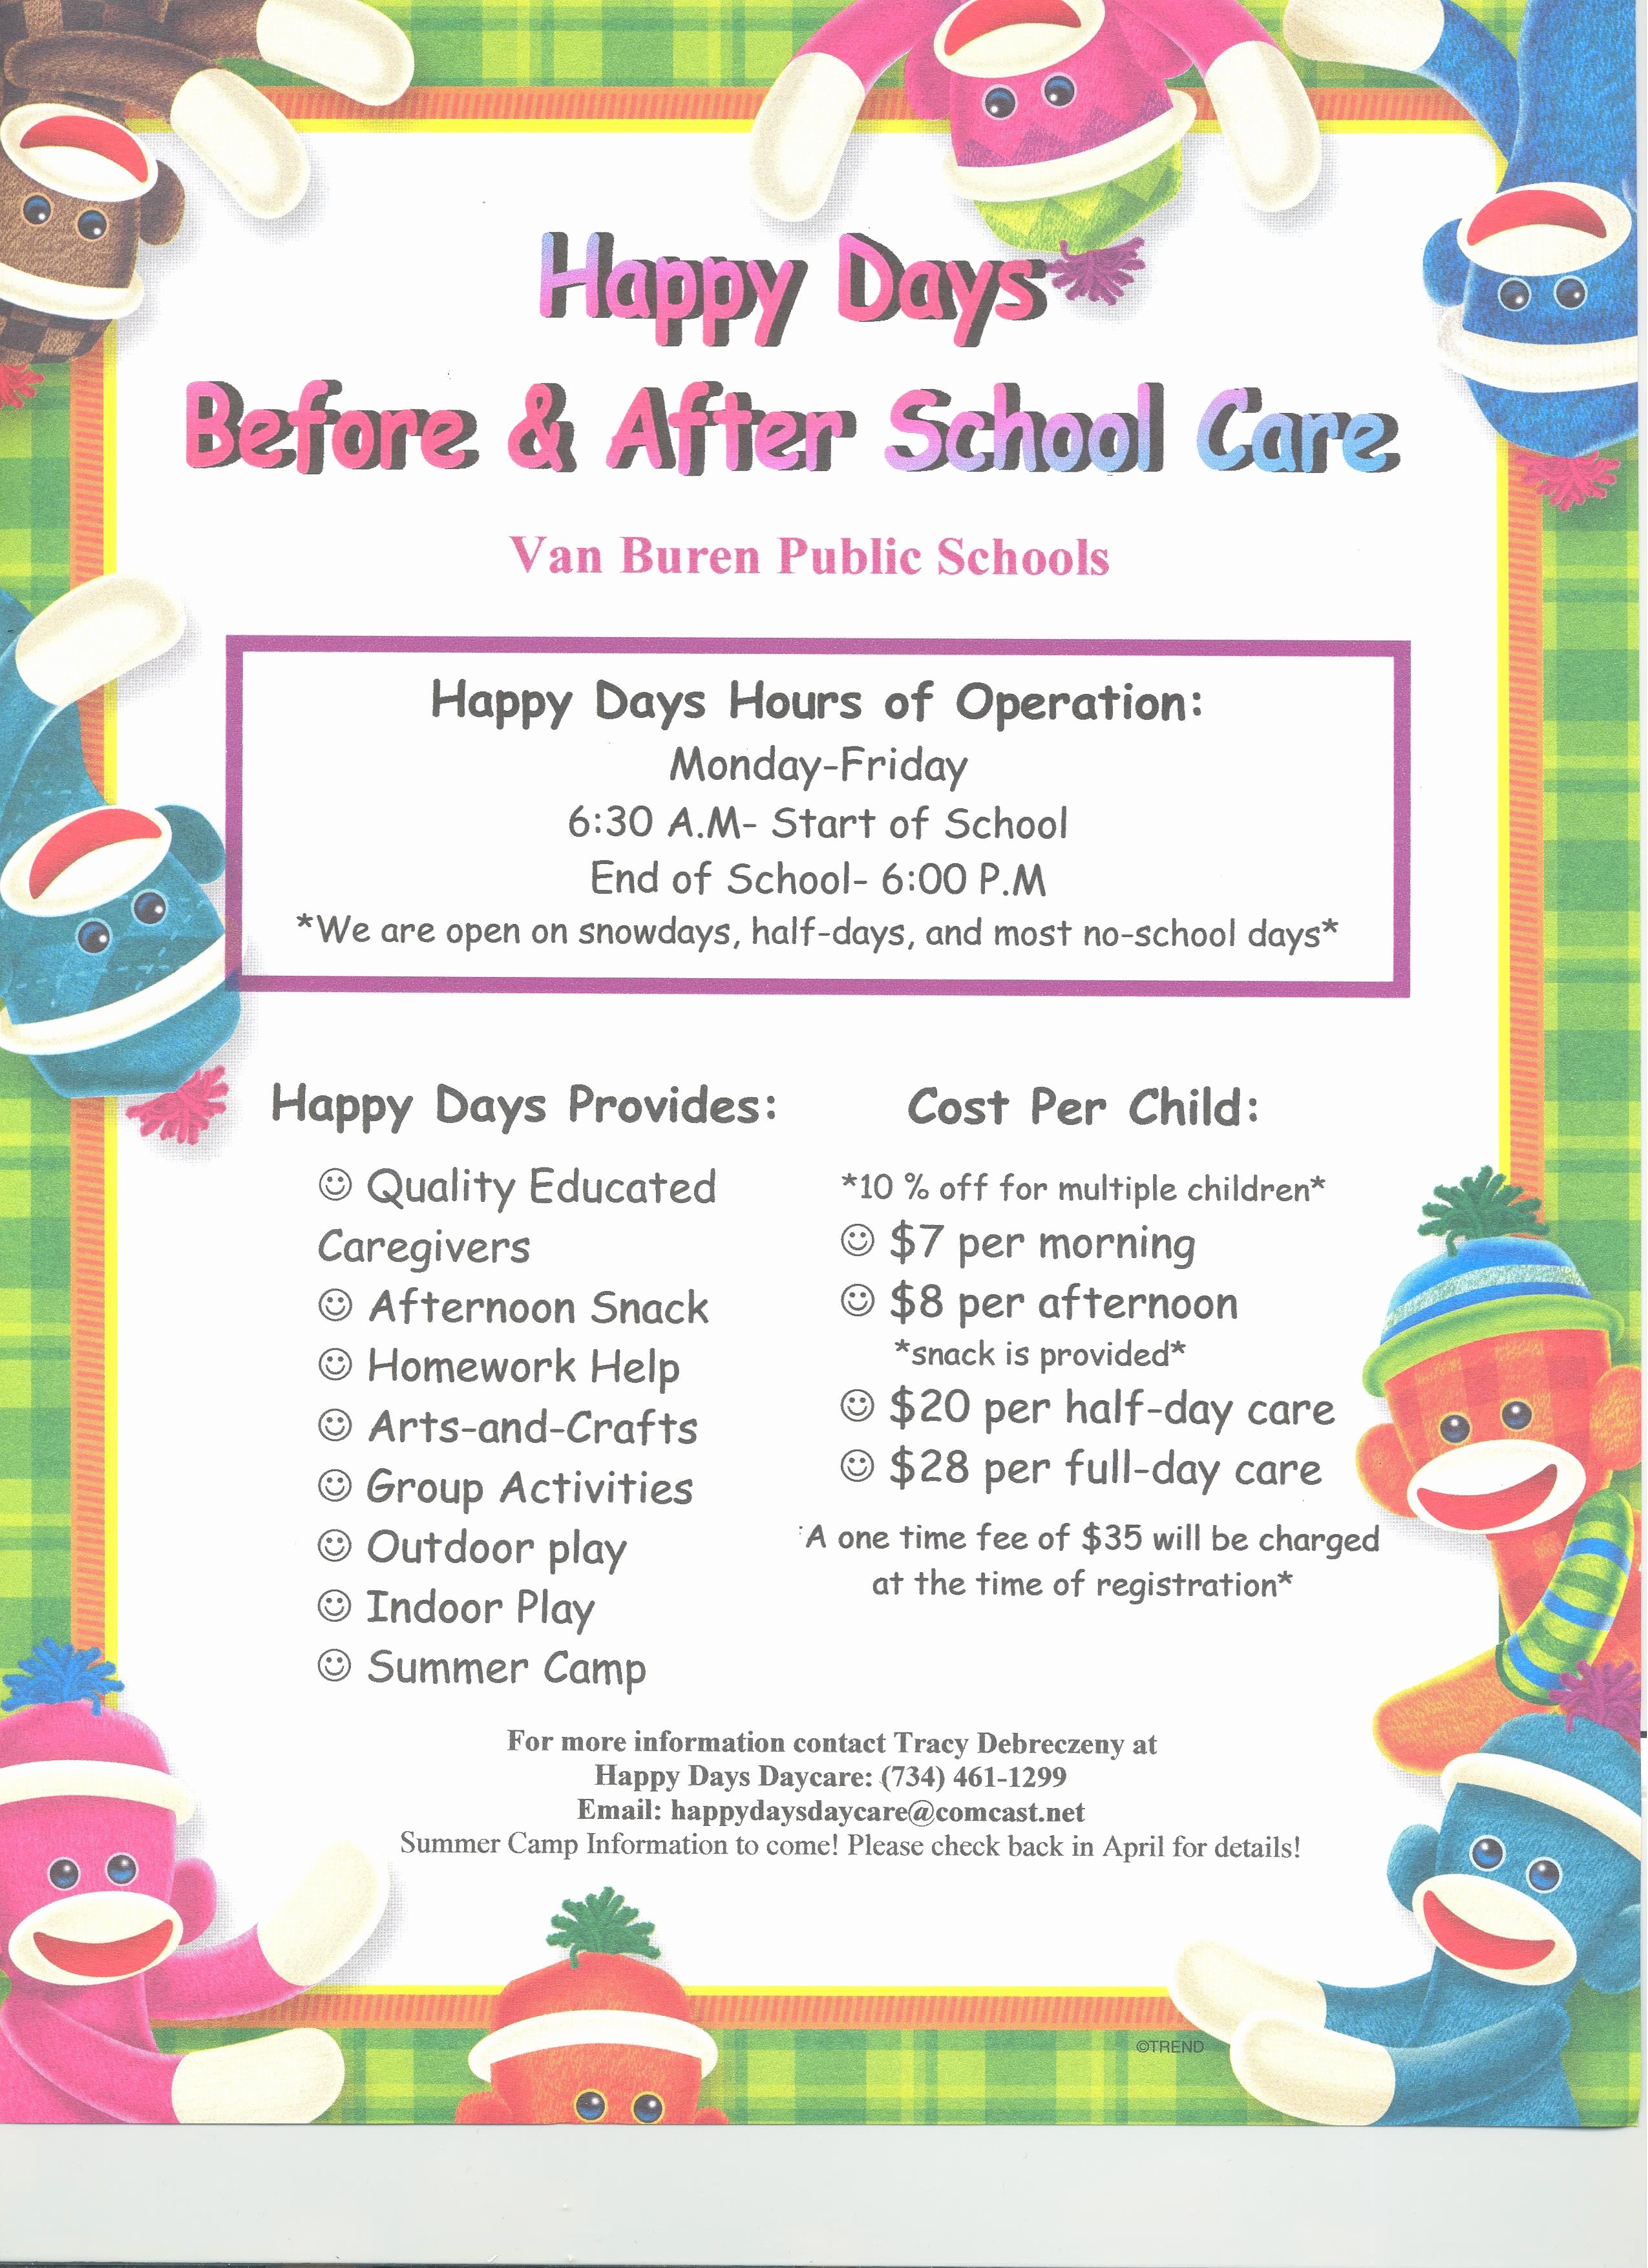 Please See the Happy Days Day Care Flyer